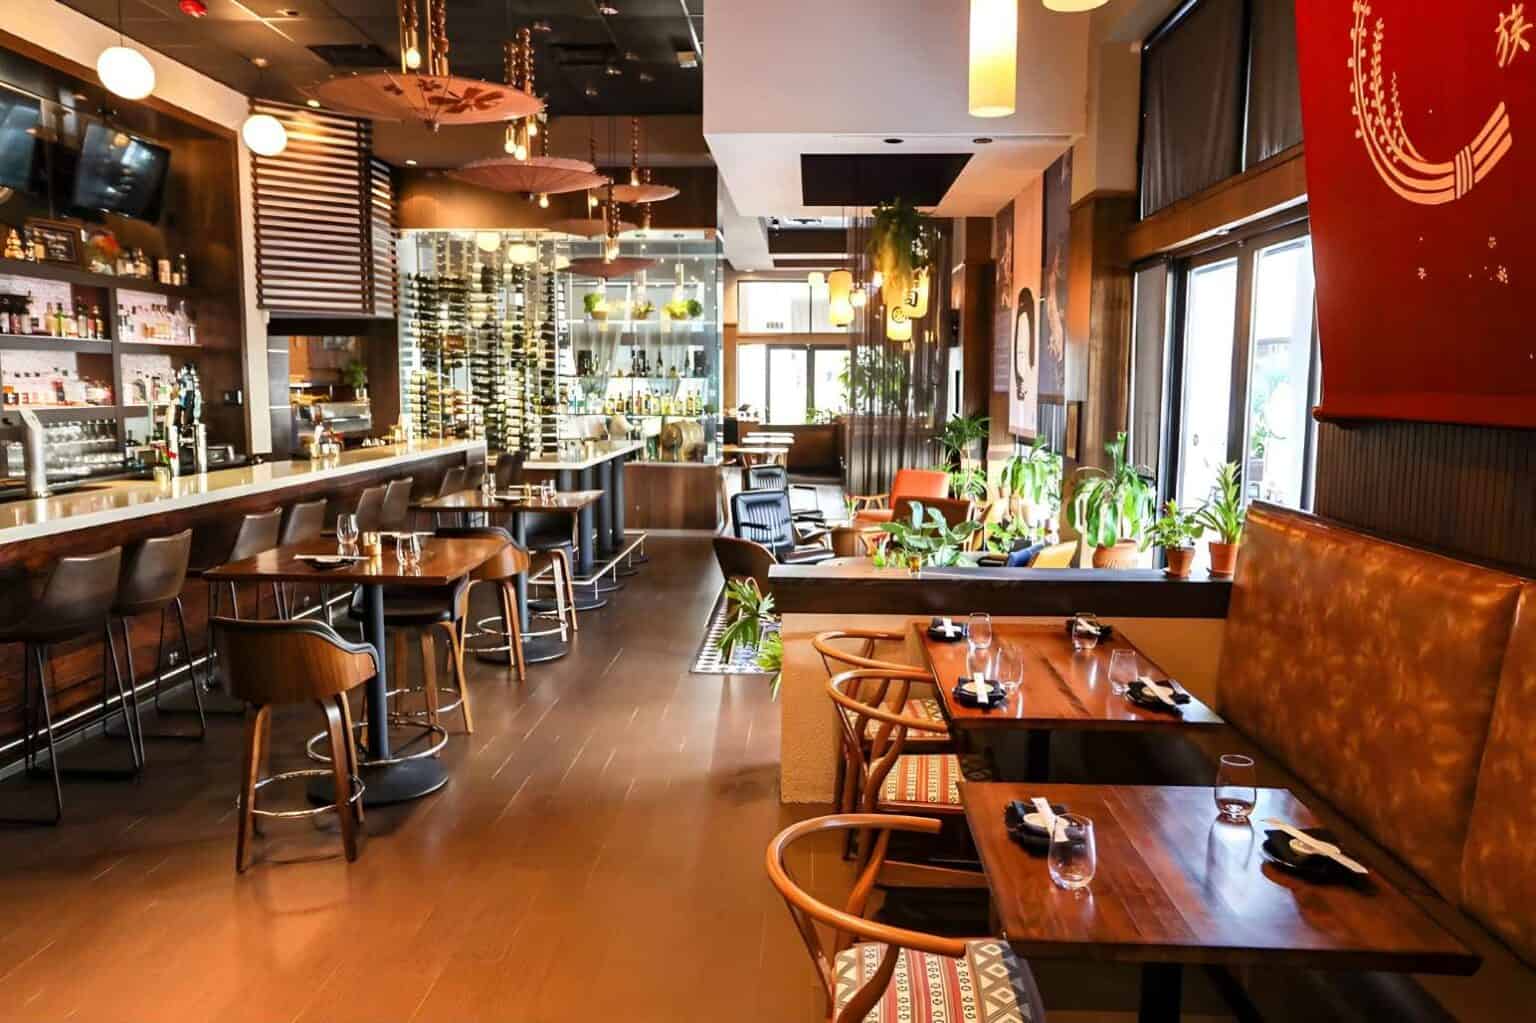 Best Sushi Places In Orlando FL 1536x1023 